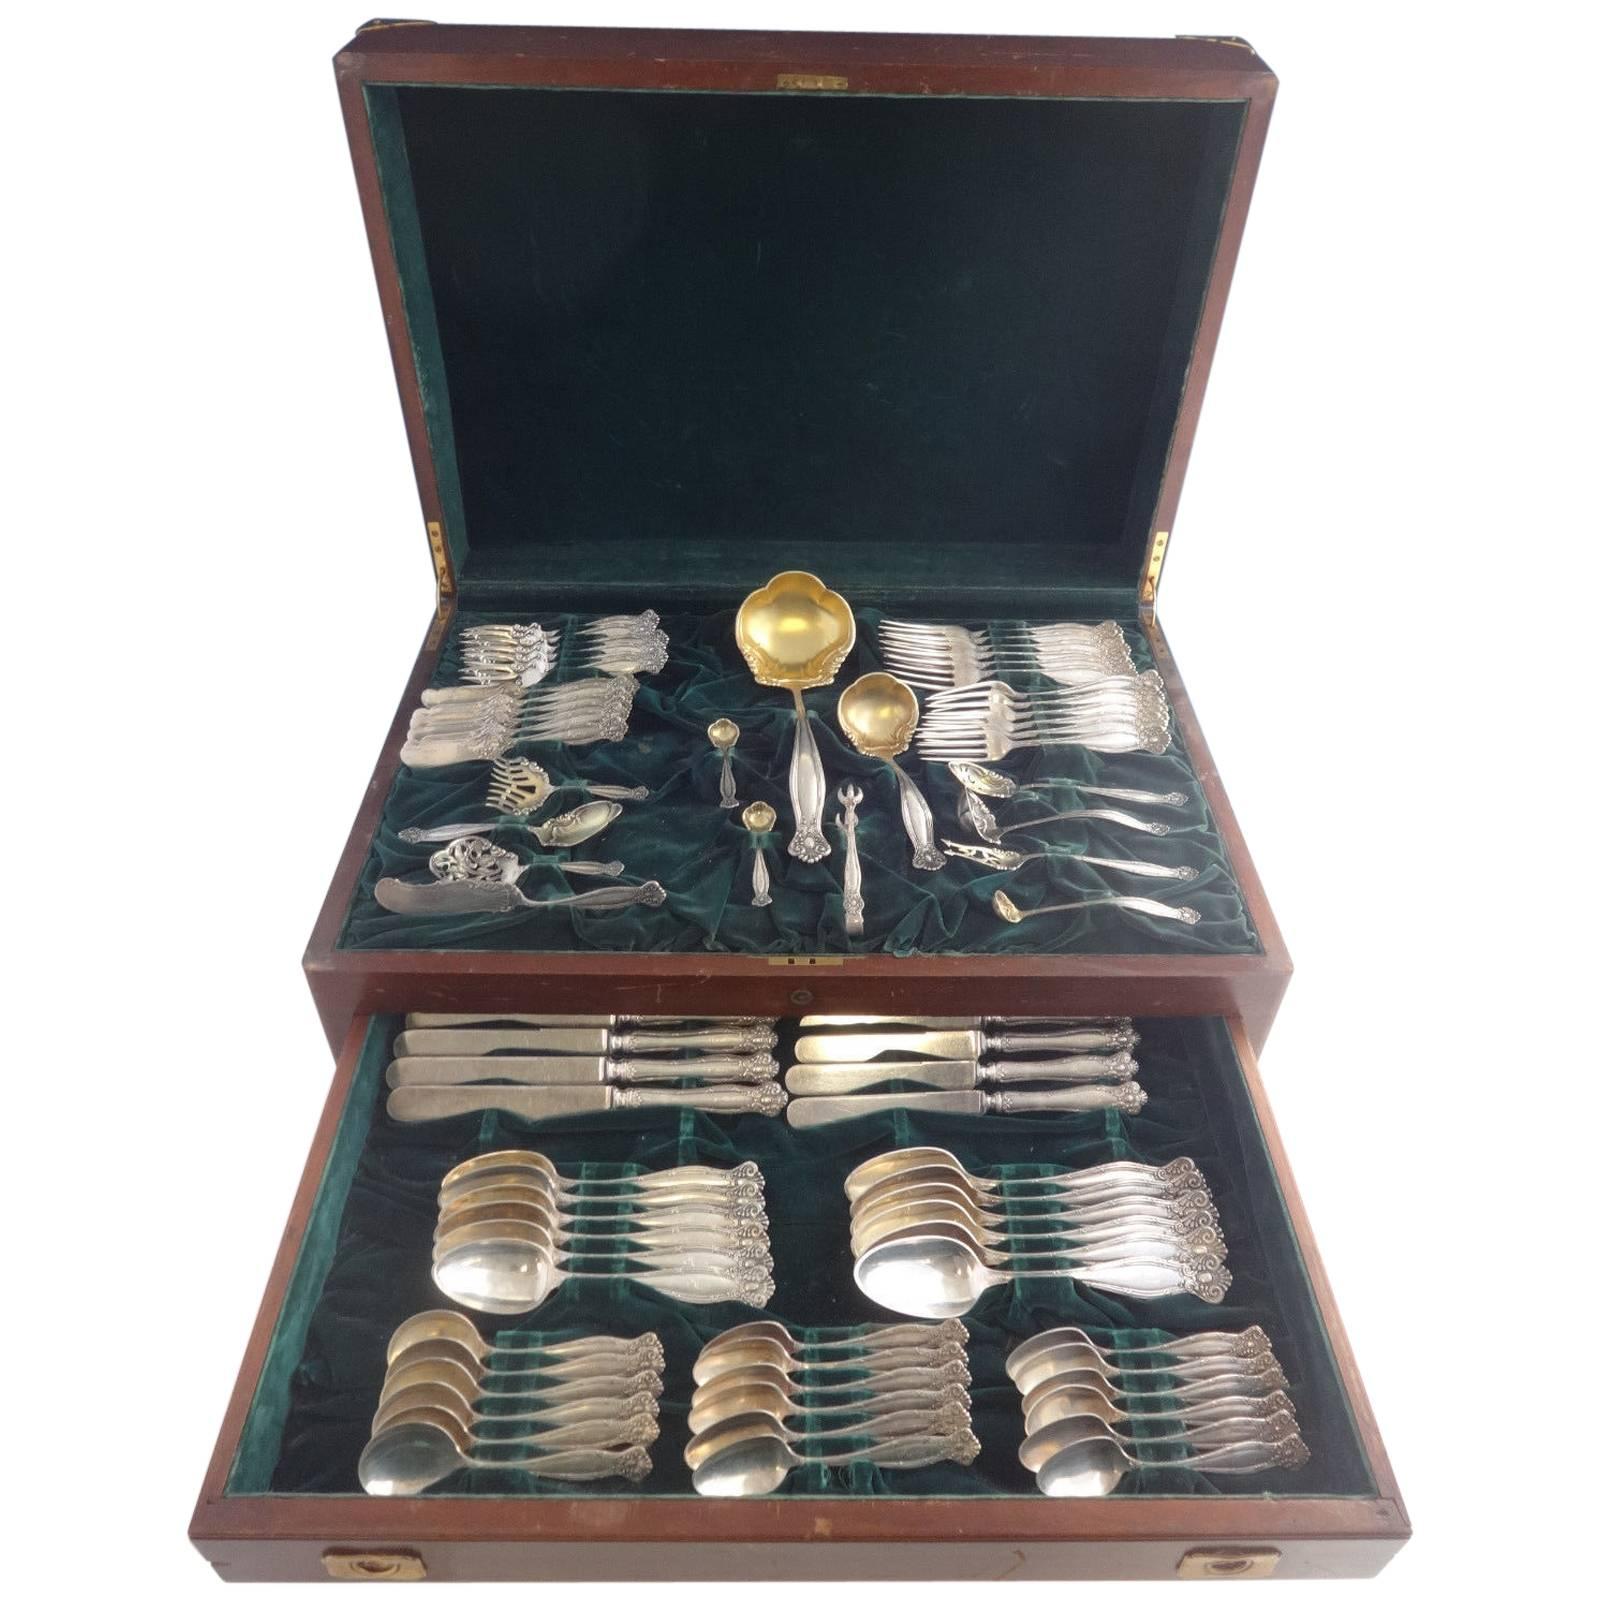 Fabulous Empire by Towle sterling silver flatware set, 79 pieces. This set includes:

Six dinner knives, 9 3/8